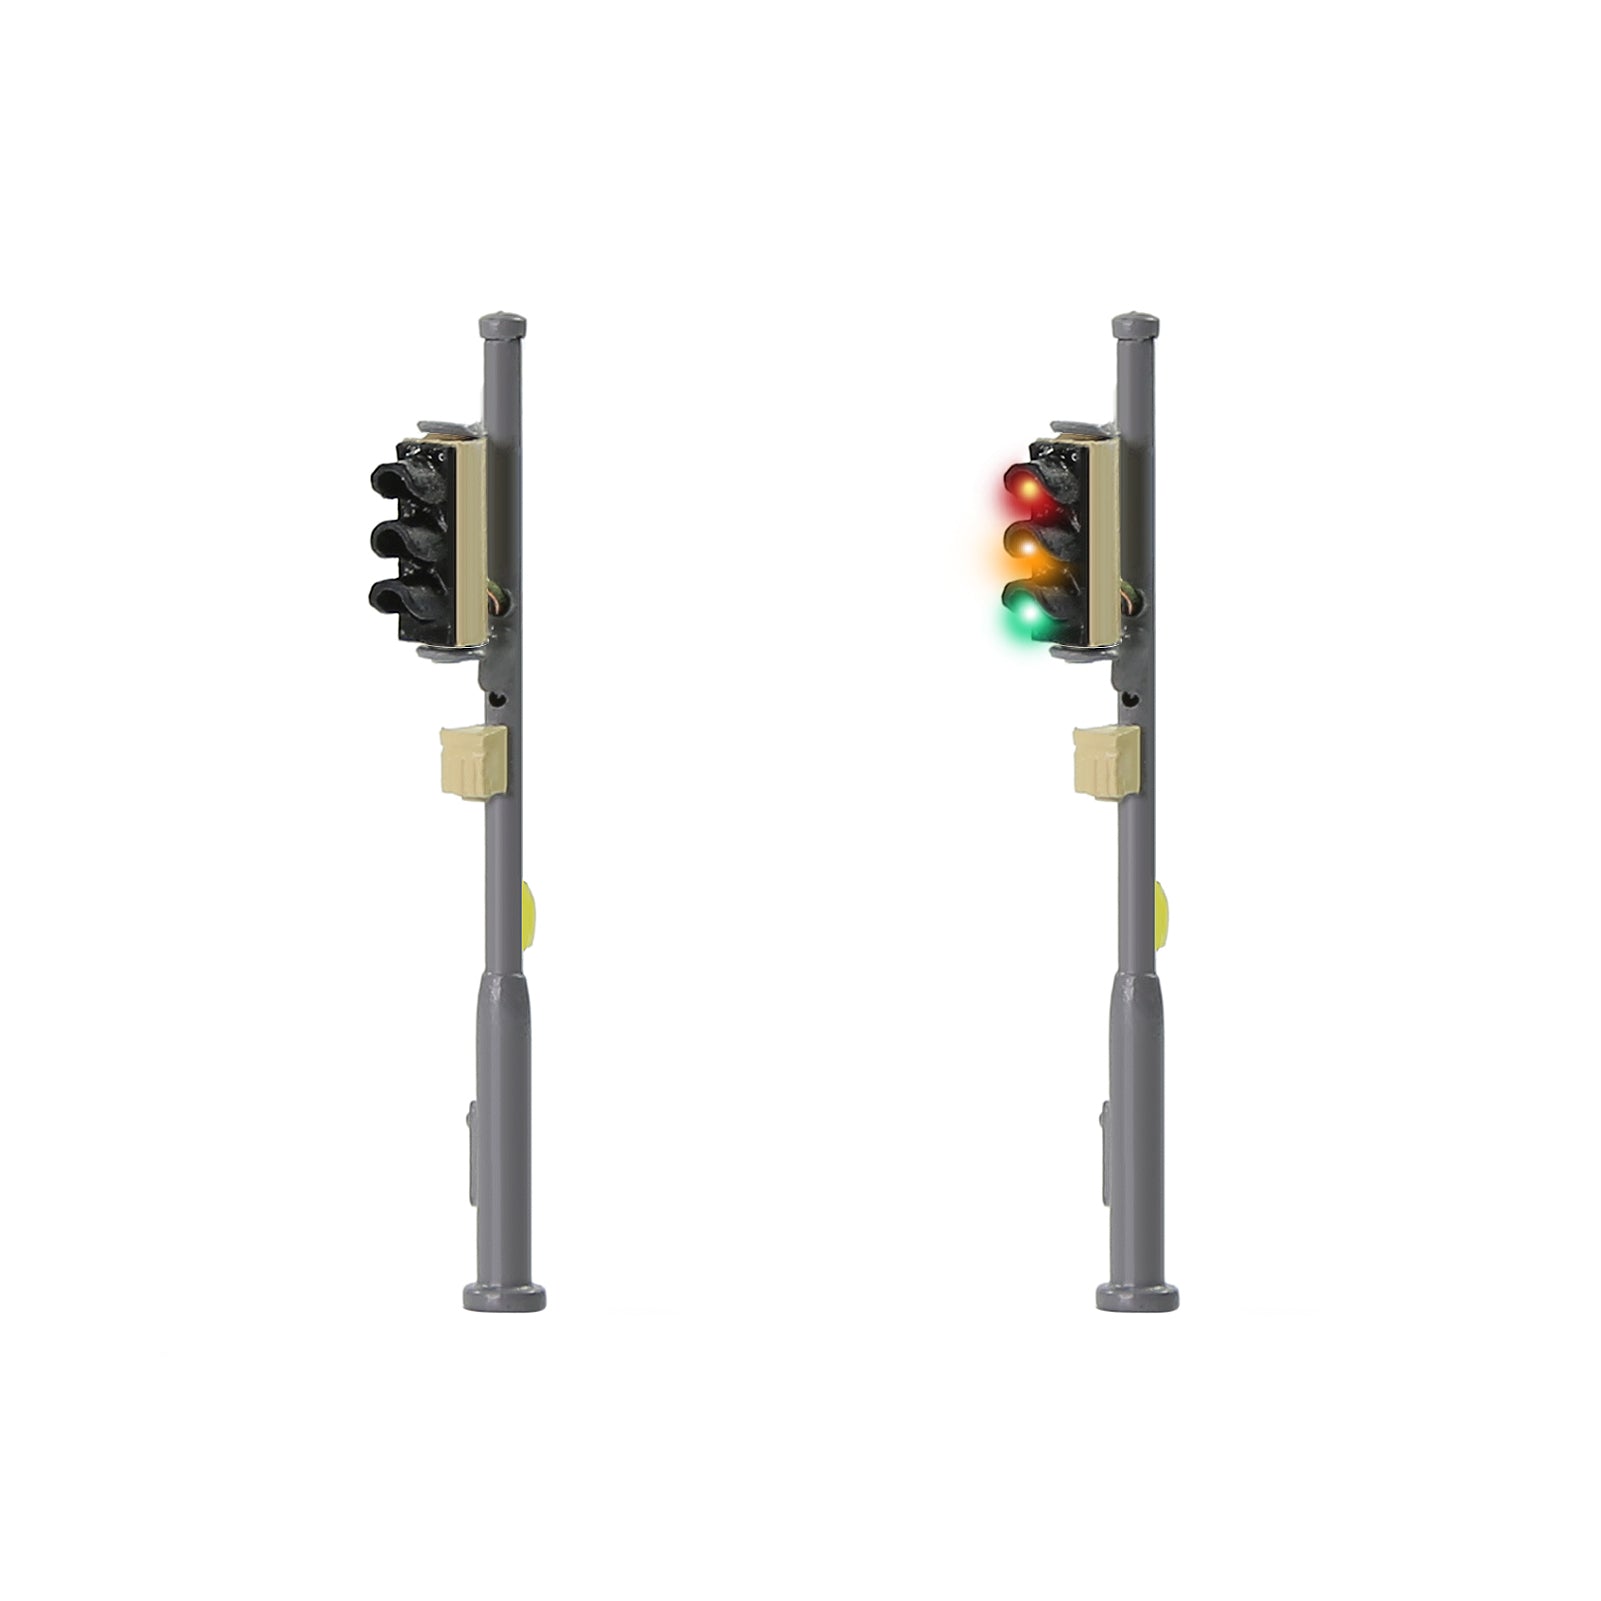 JTD1509 2 Pieces N Scale 1:160 Model Signals Track Lights LEDs